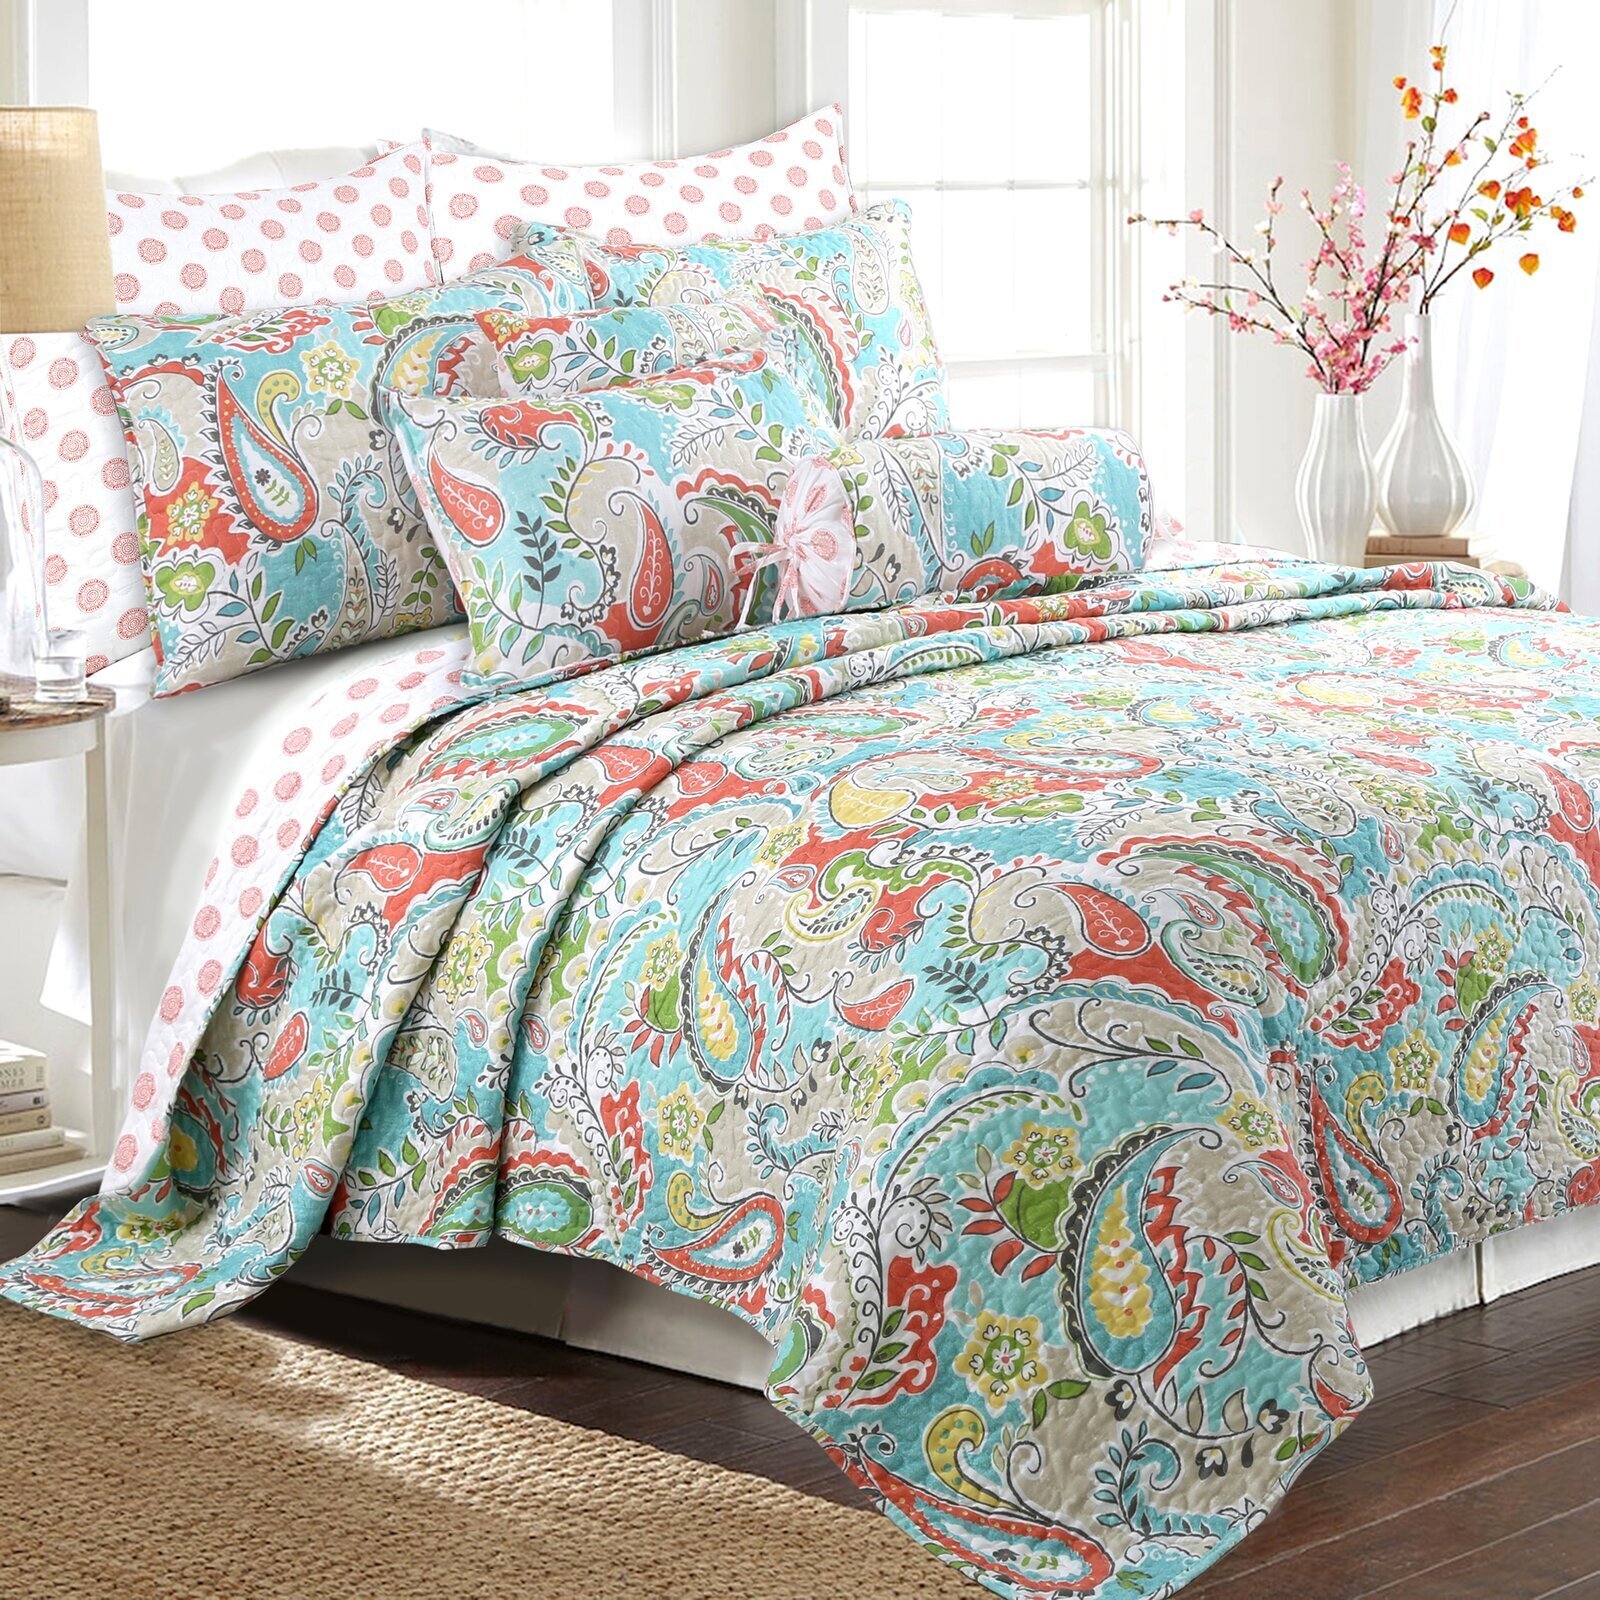 Cotton Coral and Teal Bedding Quilt Set